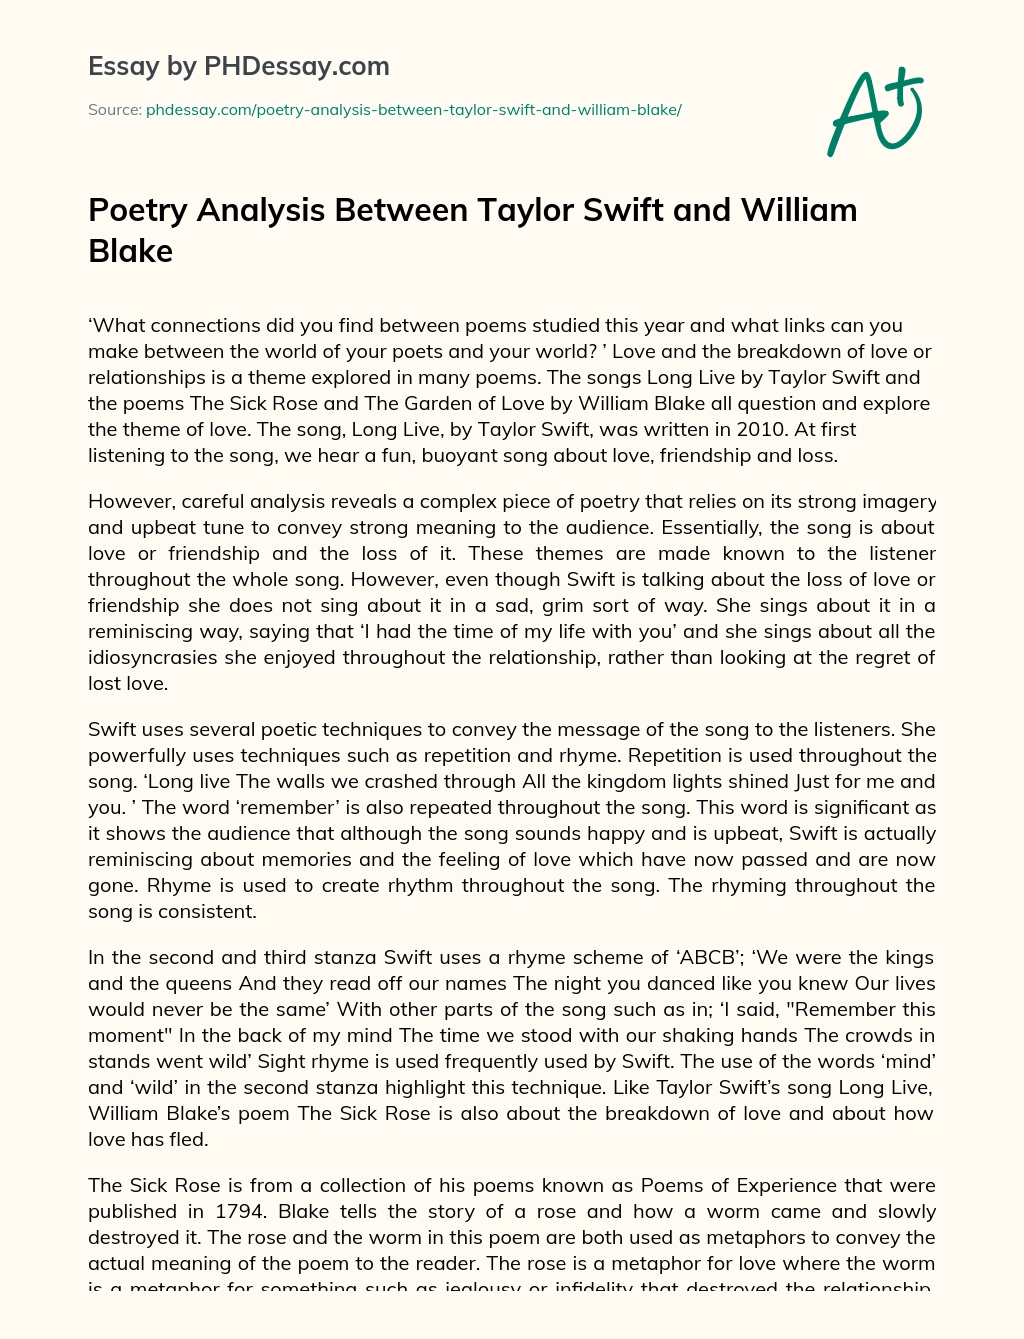 Poetry Analysis Between Taylor Swift and William Blake essay